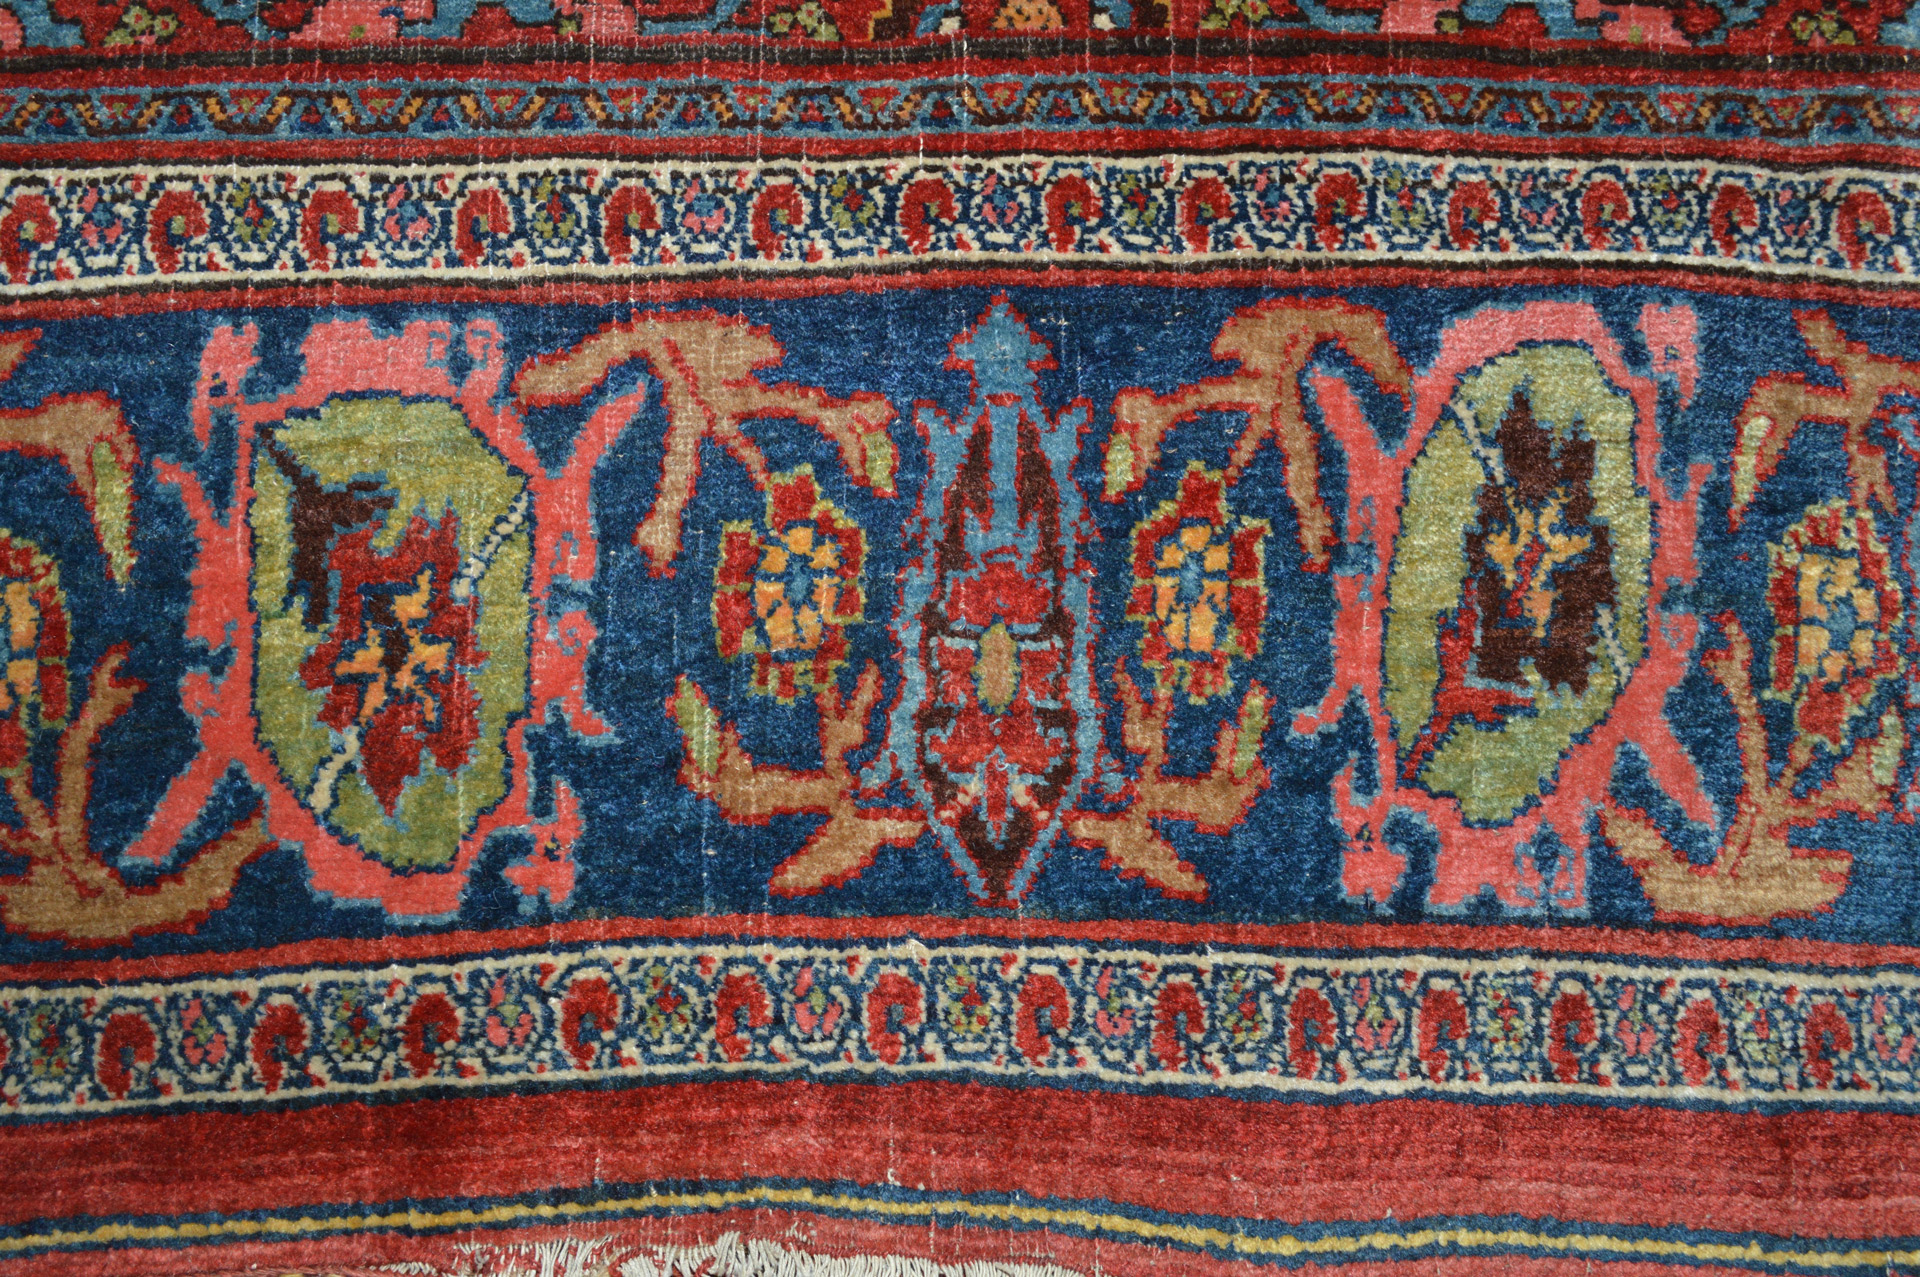 Detail of the border from an antique Persian Bidjar carpet - Douglas Stock Gallery, antique Oriental rugs Boston,MA area New England, antique Persian carpets